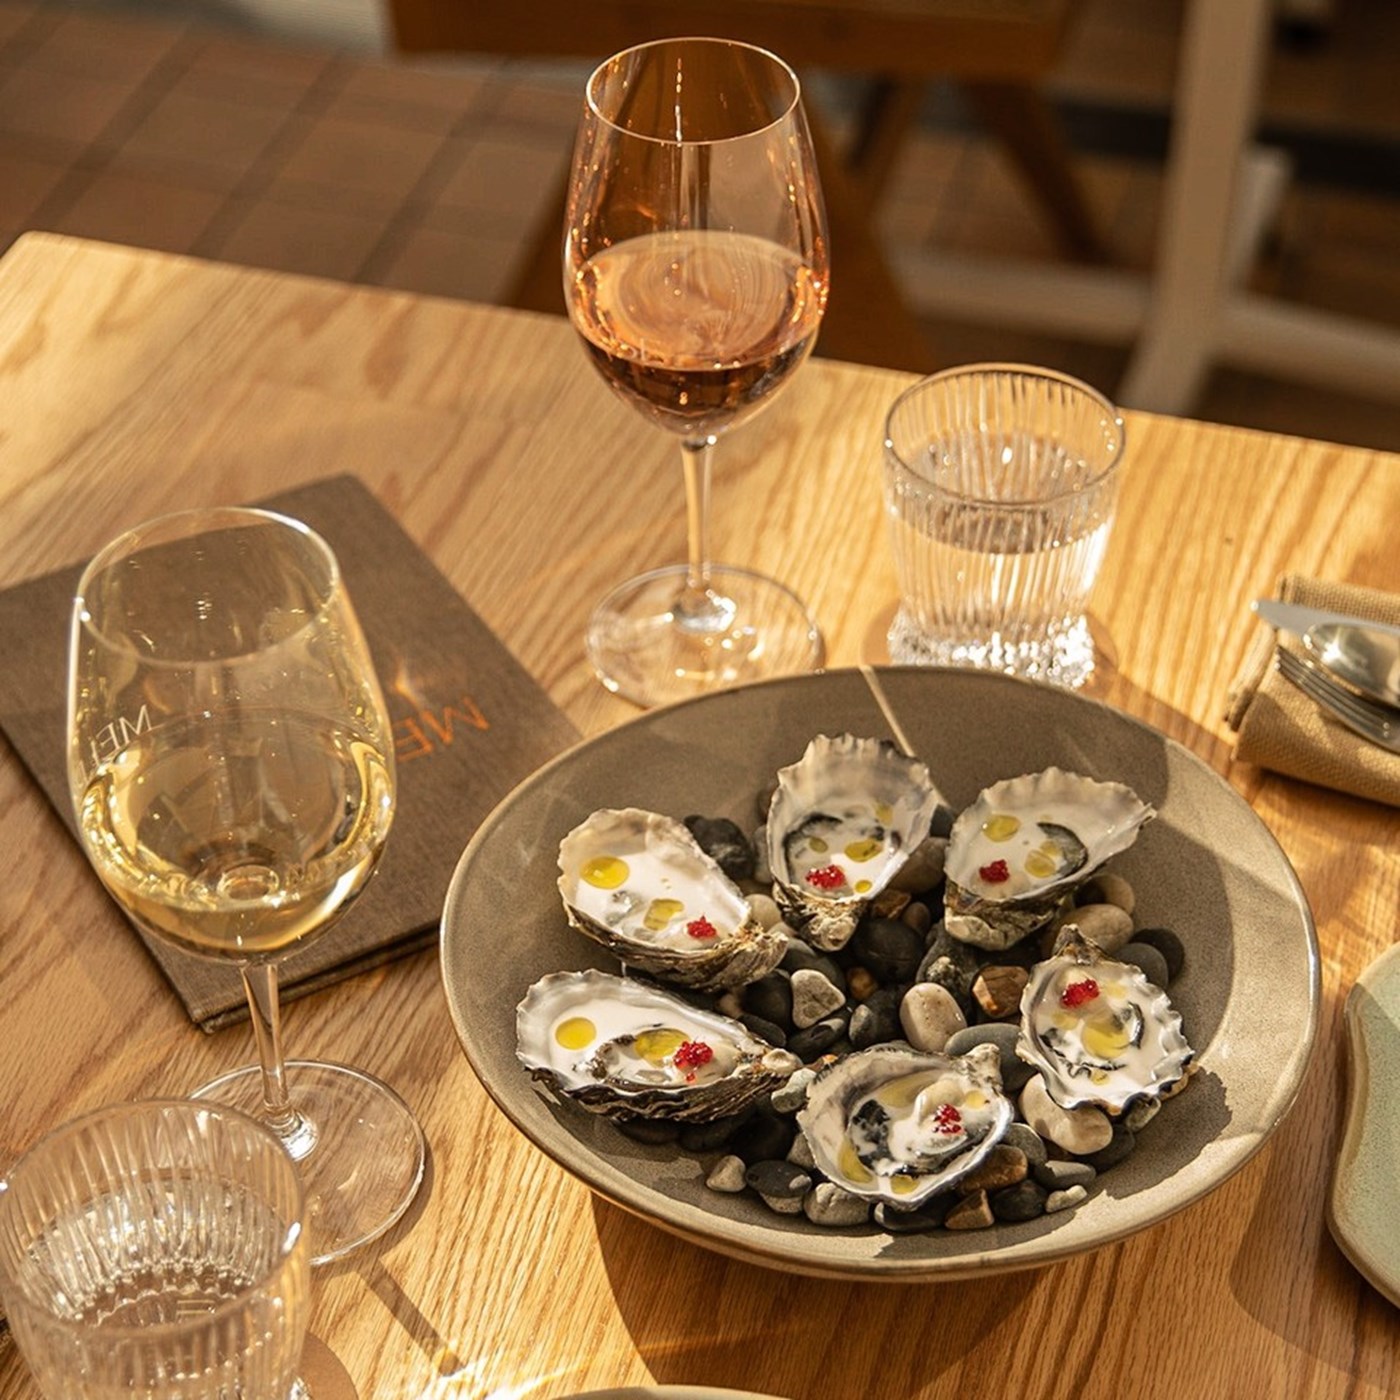 A sunlit table with two glasses and a plate of oysters